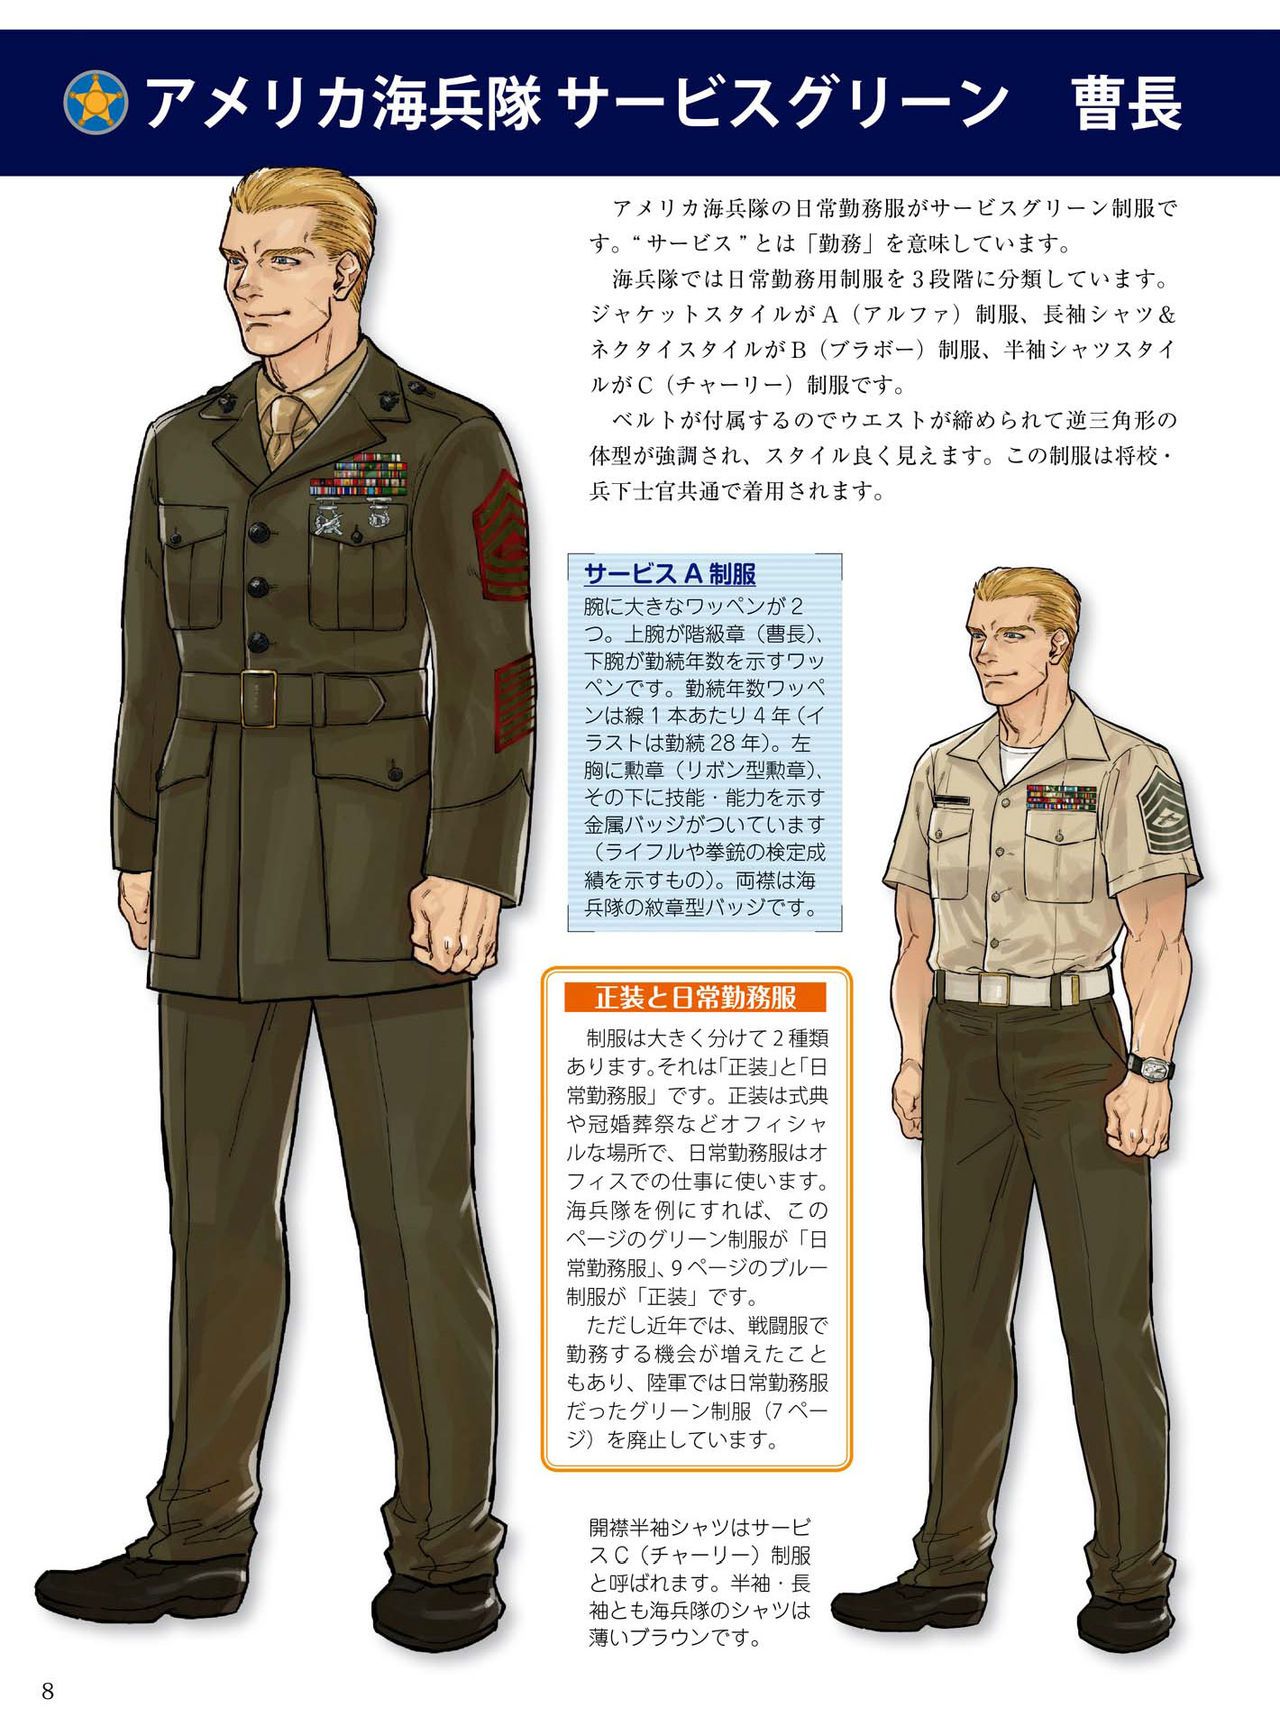 How to draw military uniforms and uniforms From Self-Defense Forces 軍服・制服の描き方 アメリカ軍・自衛隊の制服から戦闘服まで 11